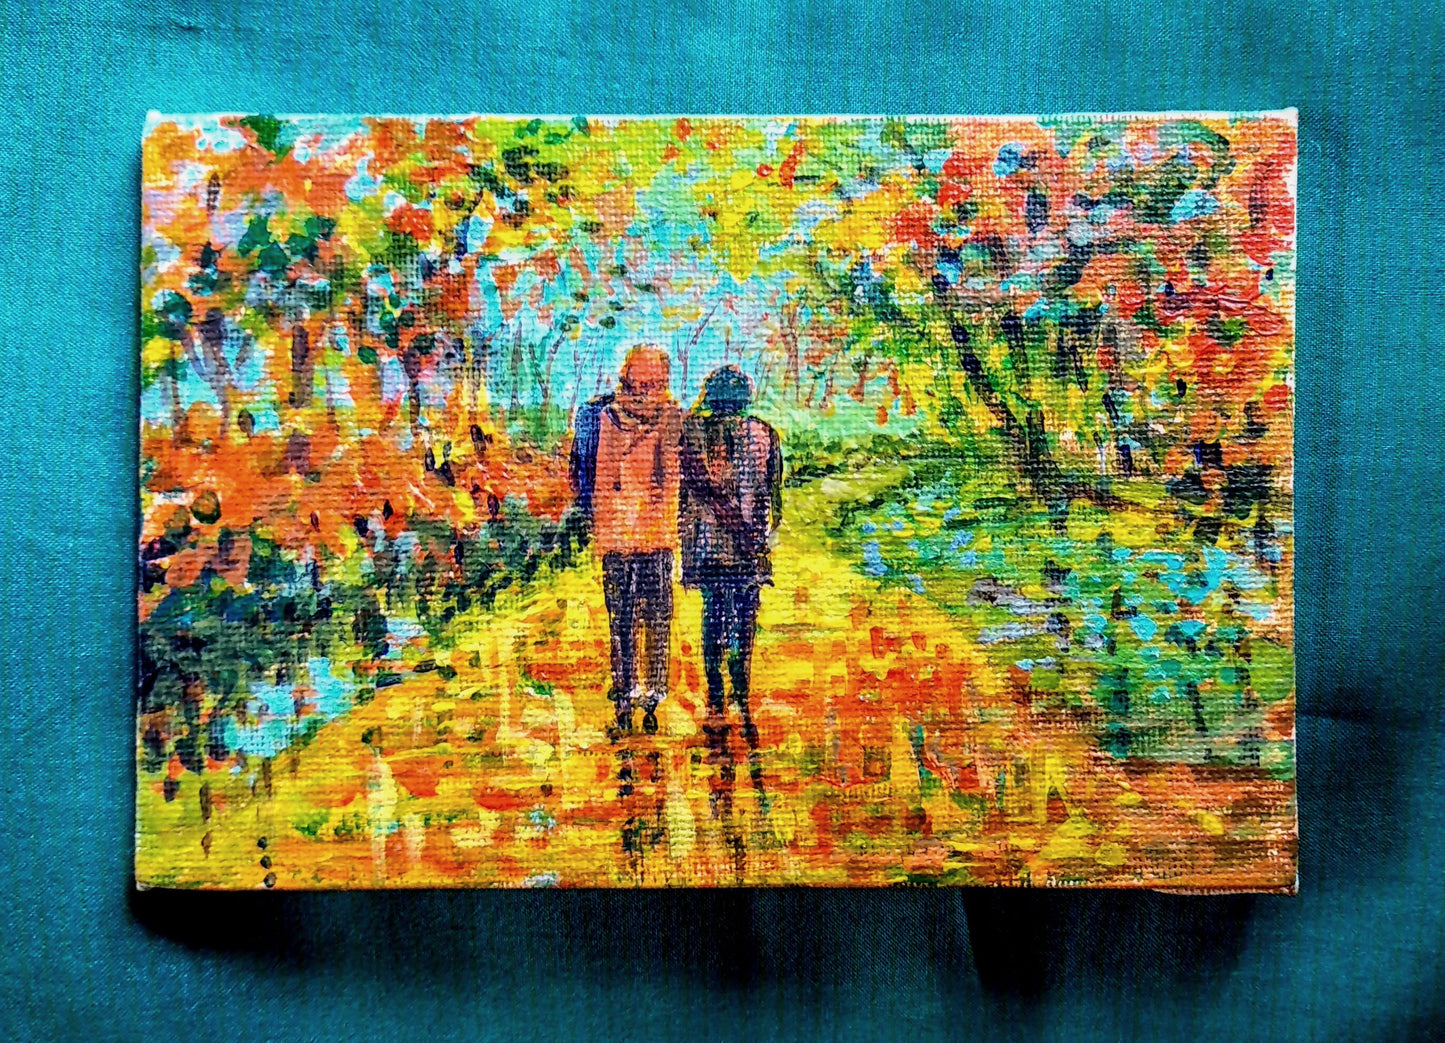 Studio view Romantic walk in autumn, Lovers stroll canvas painting